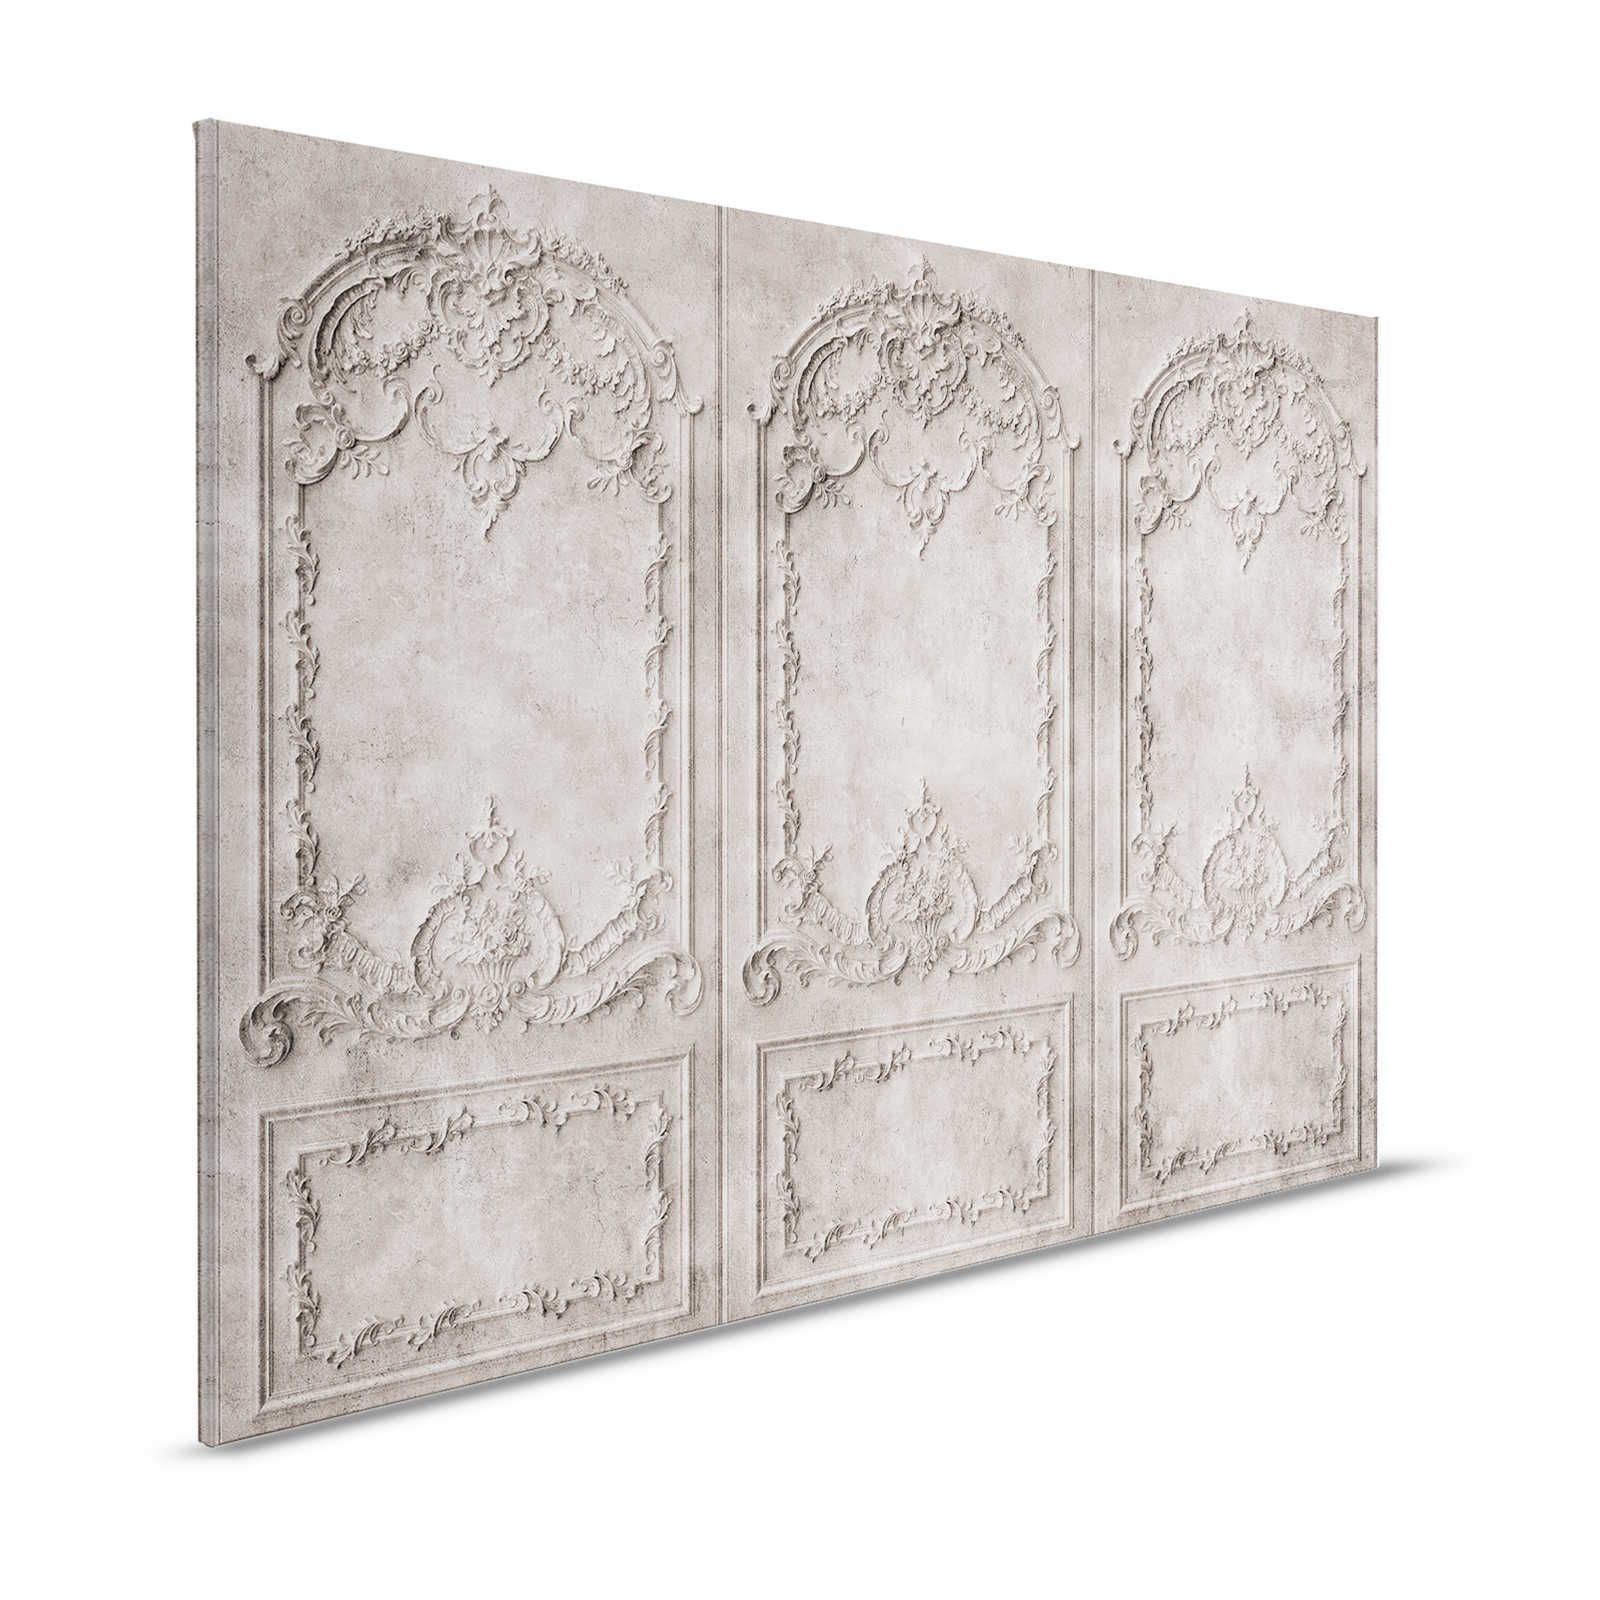 Versailles 1 - Canvas painting Grey-Brown Baroque style wooden panels - 1.20 m x 0.80 m
